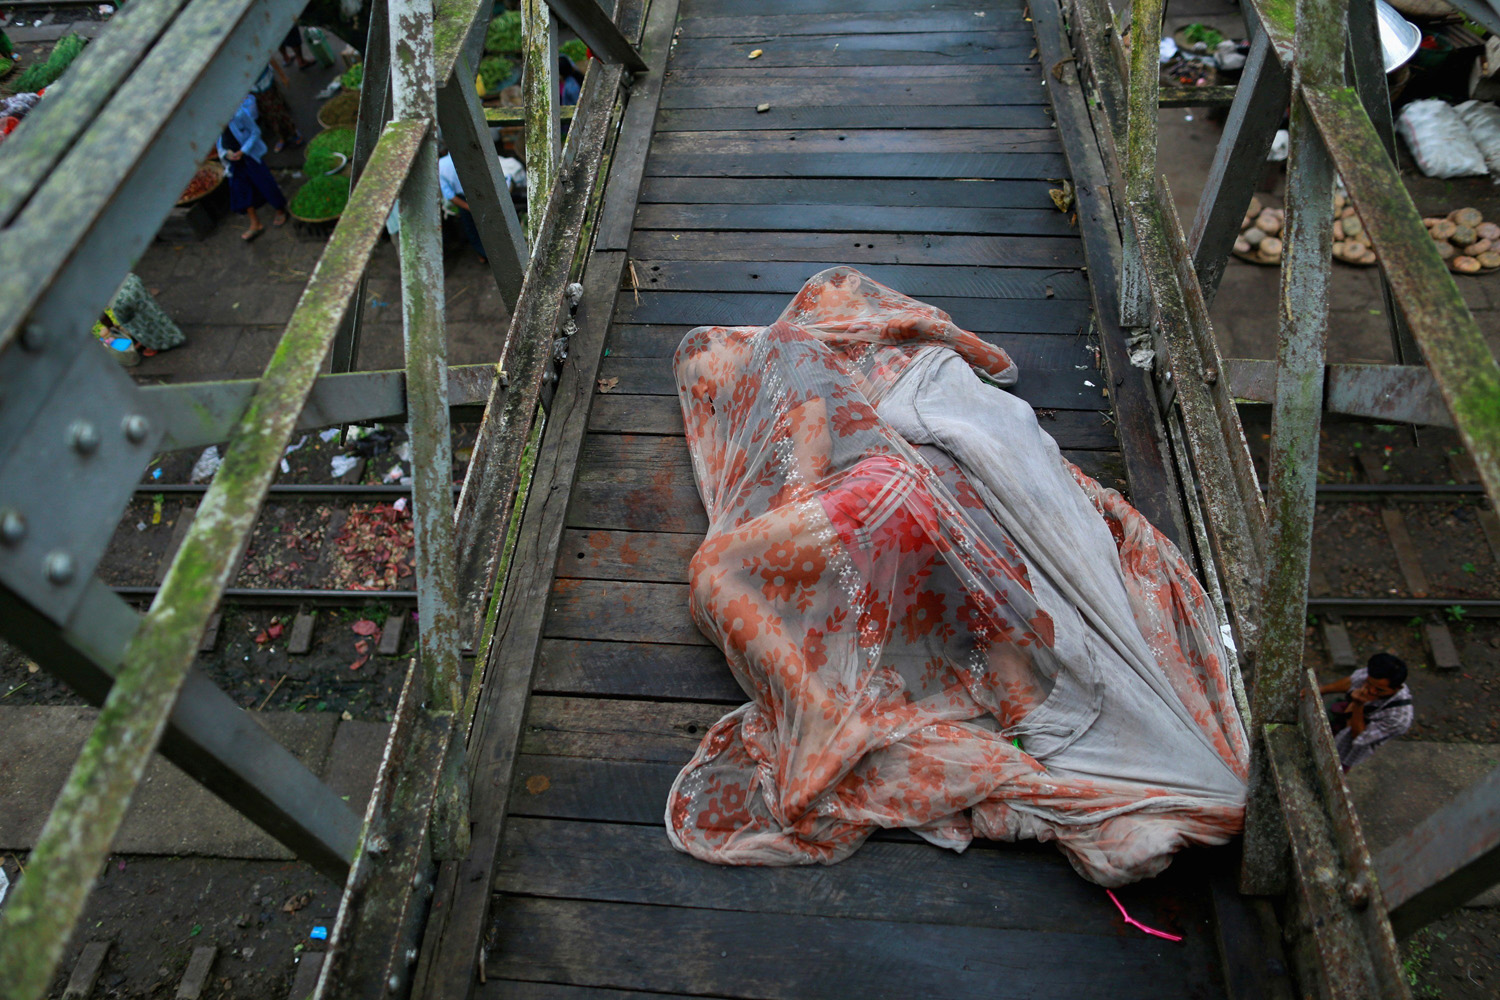 Aug. 20, 2014. Men sleep covered with a mosquito net on a bridge above a train station outside Yangon.